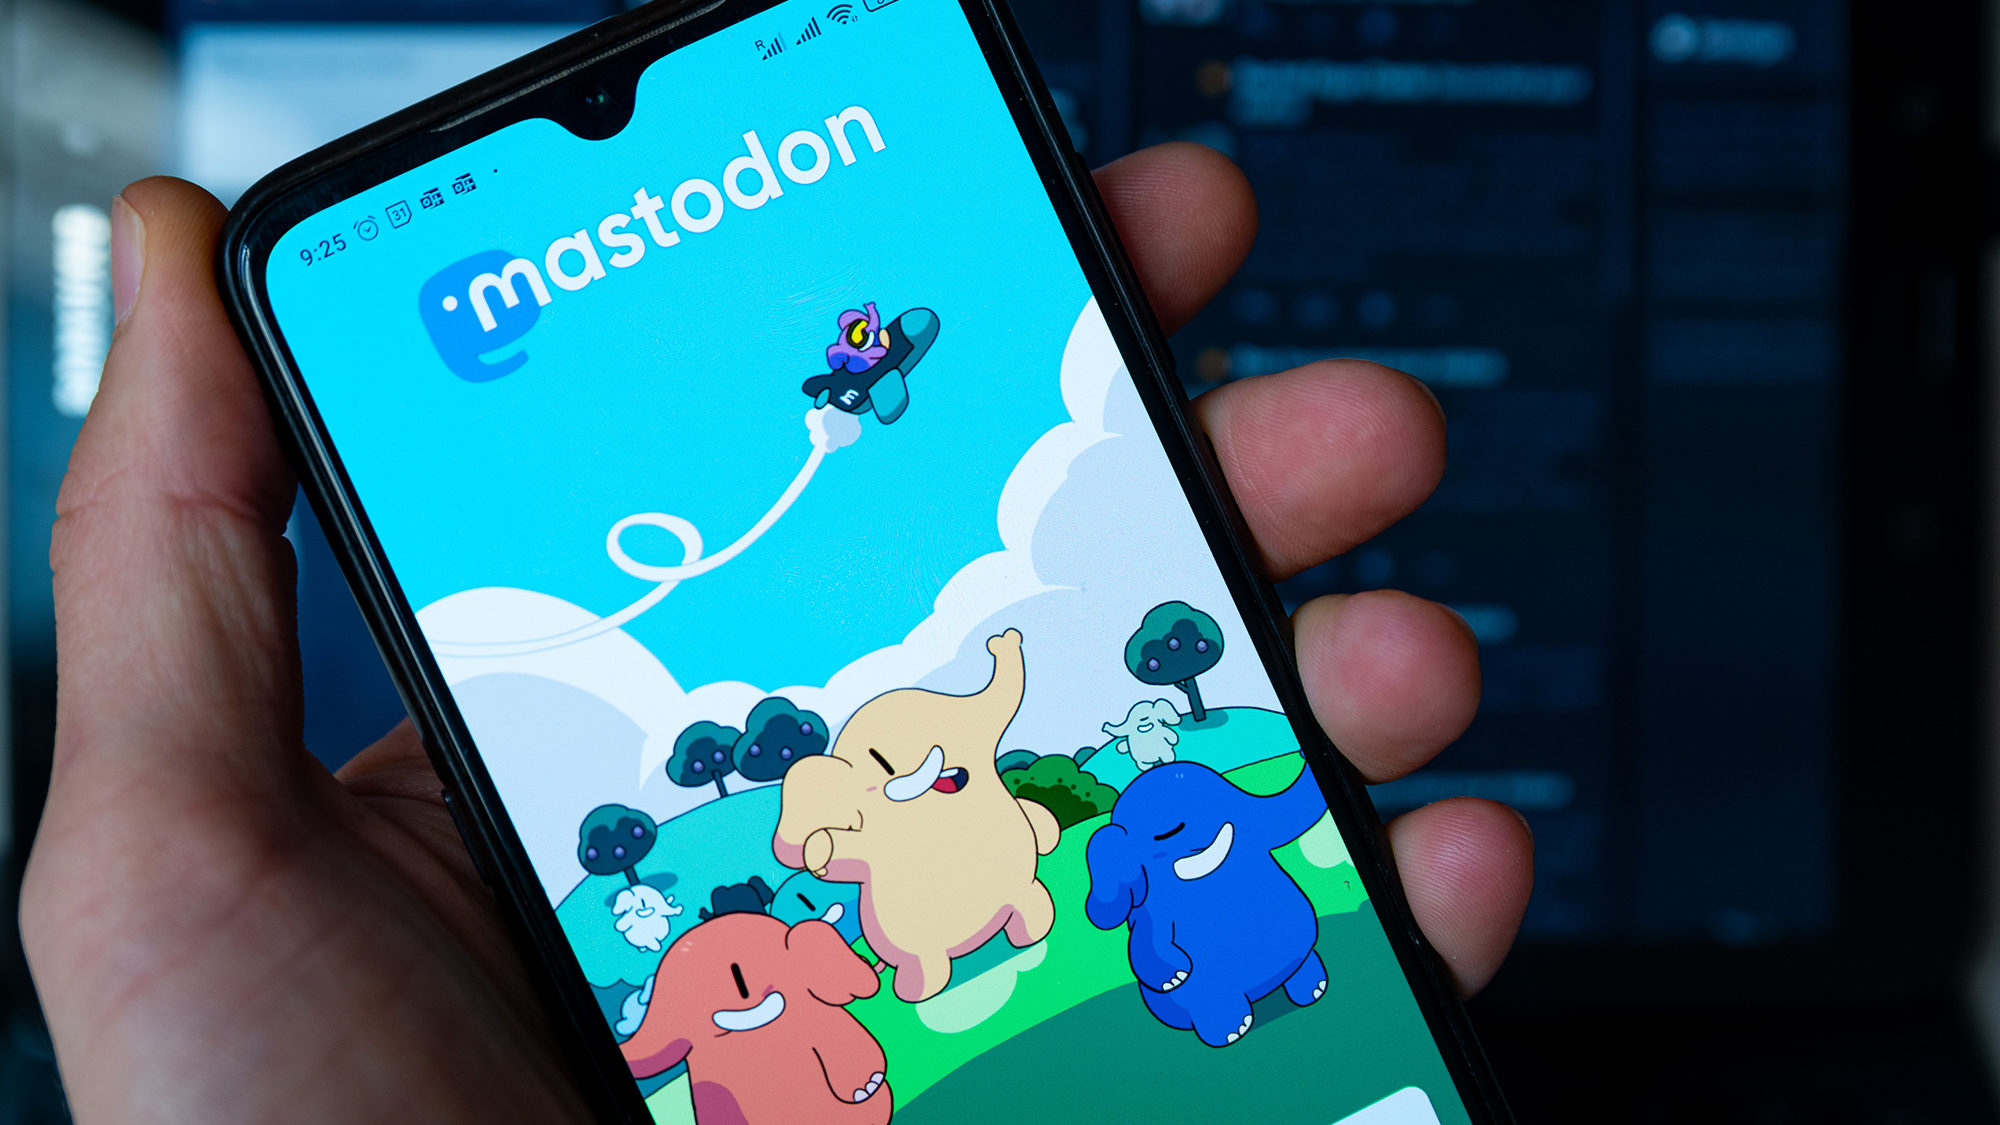 Image of a cell phone displaying new social media app called Mastodon, which is described as an alt...